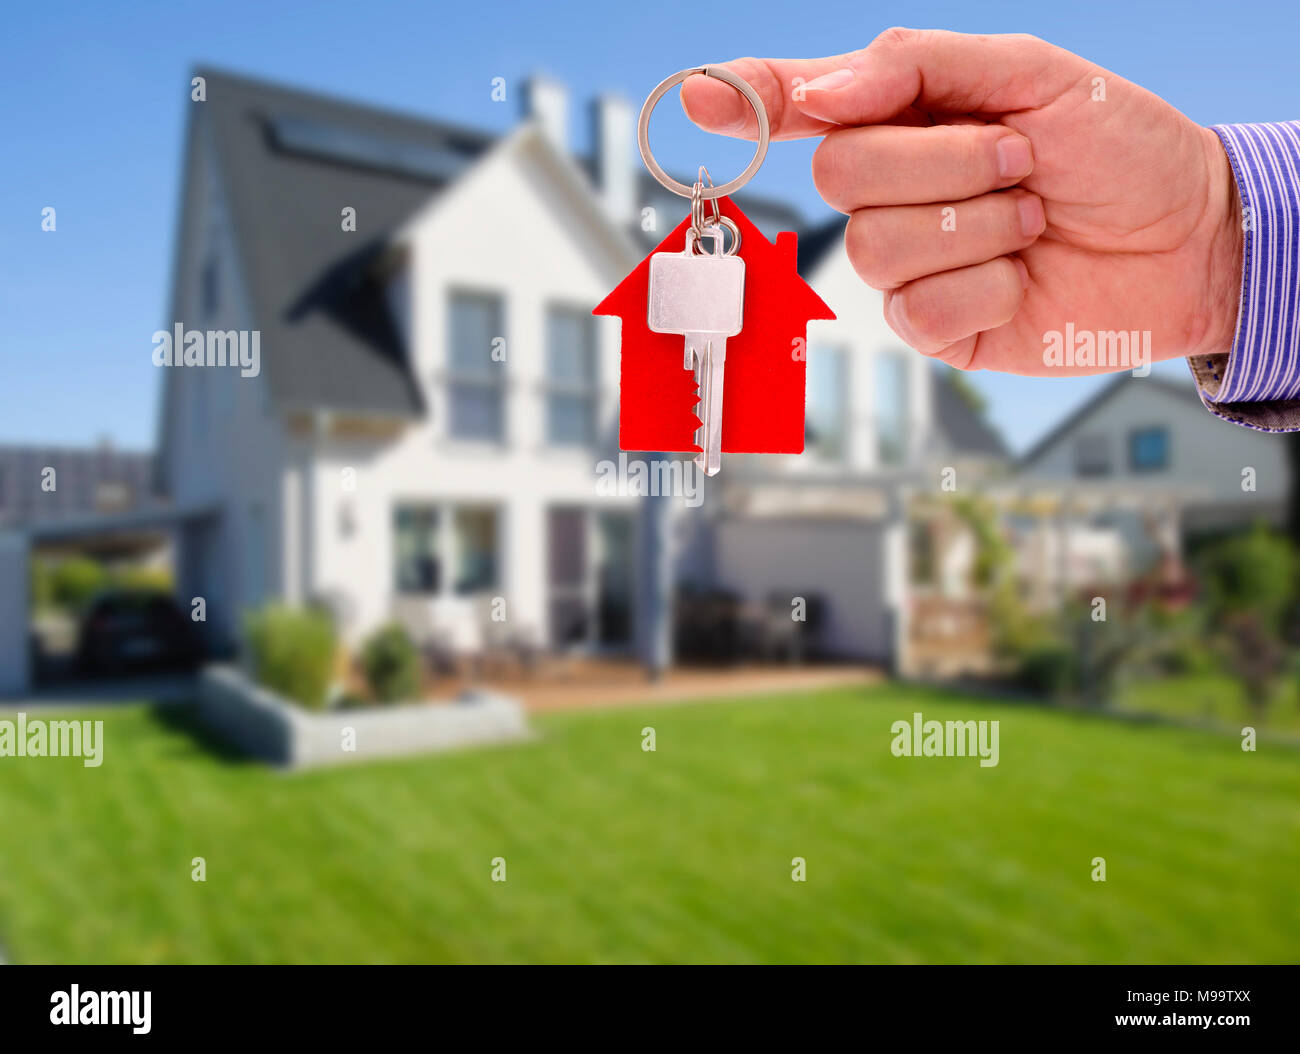 key in hand of real estate agent as offer for new residential home Stock Photo